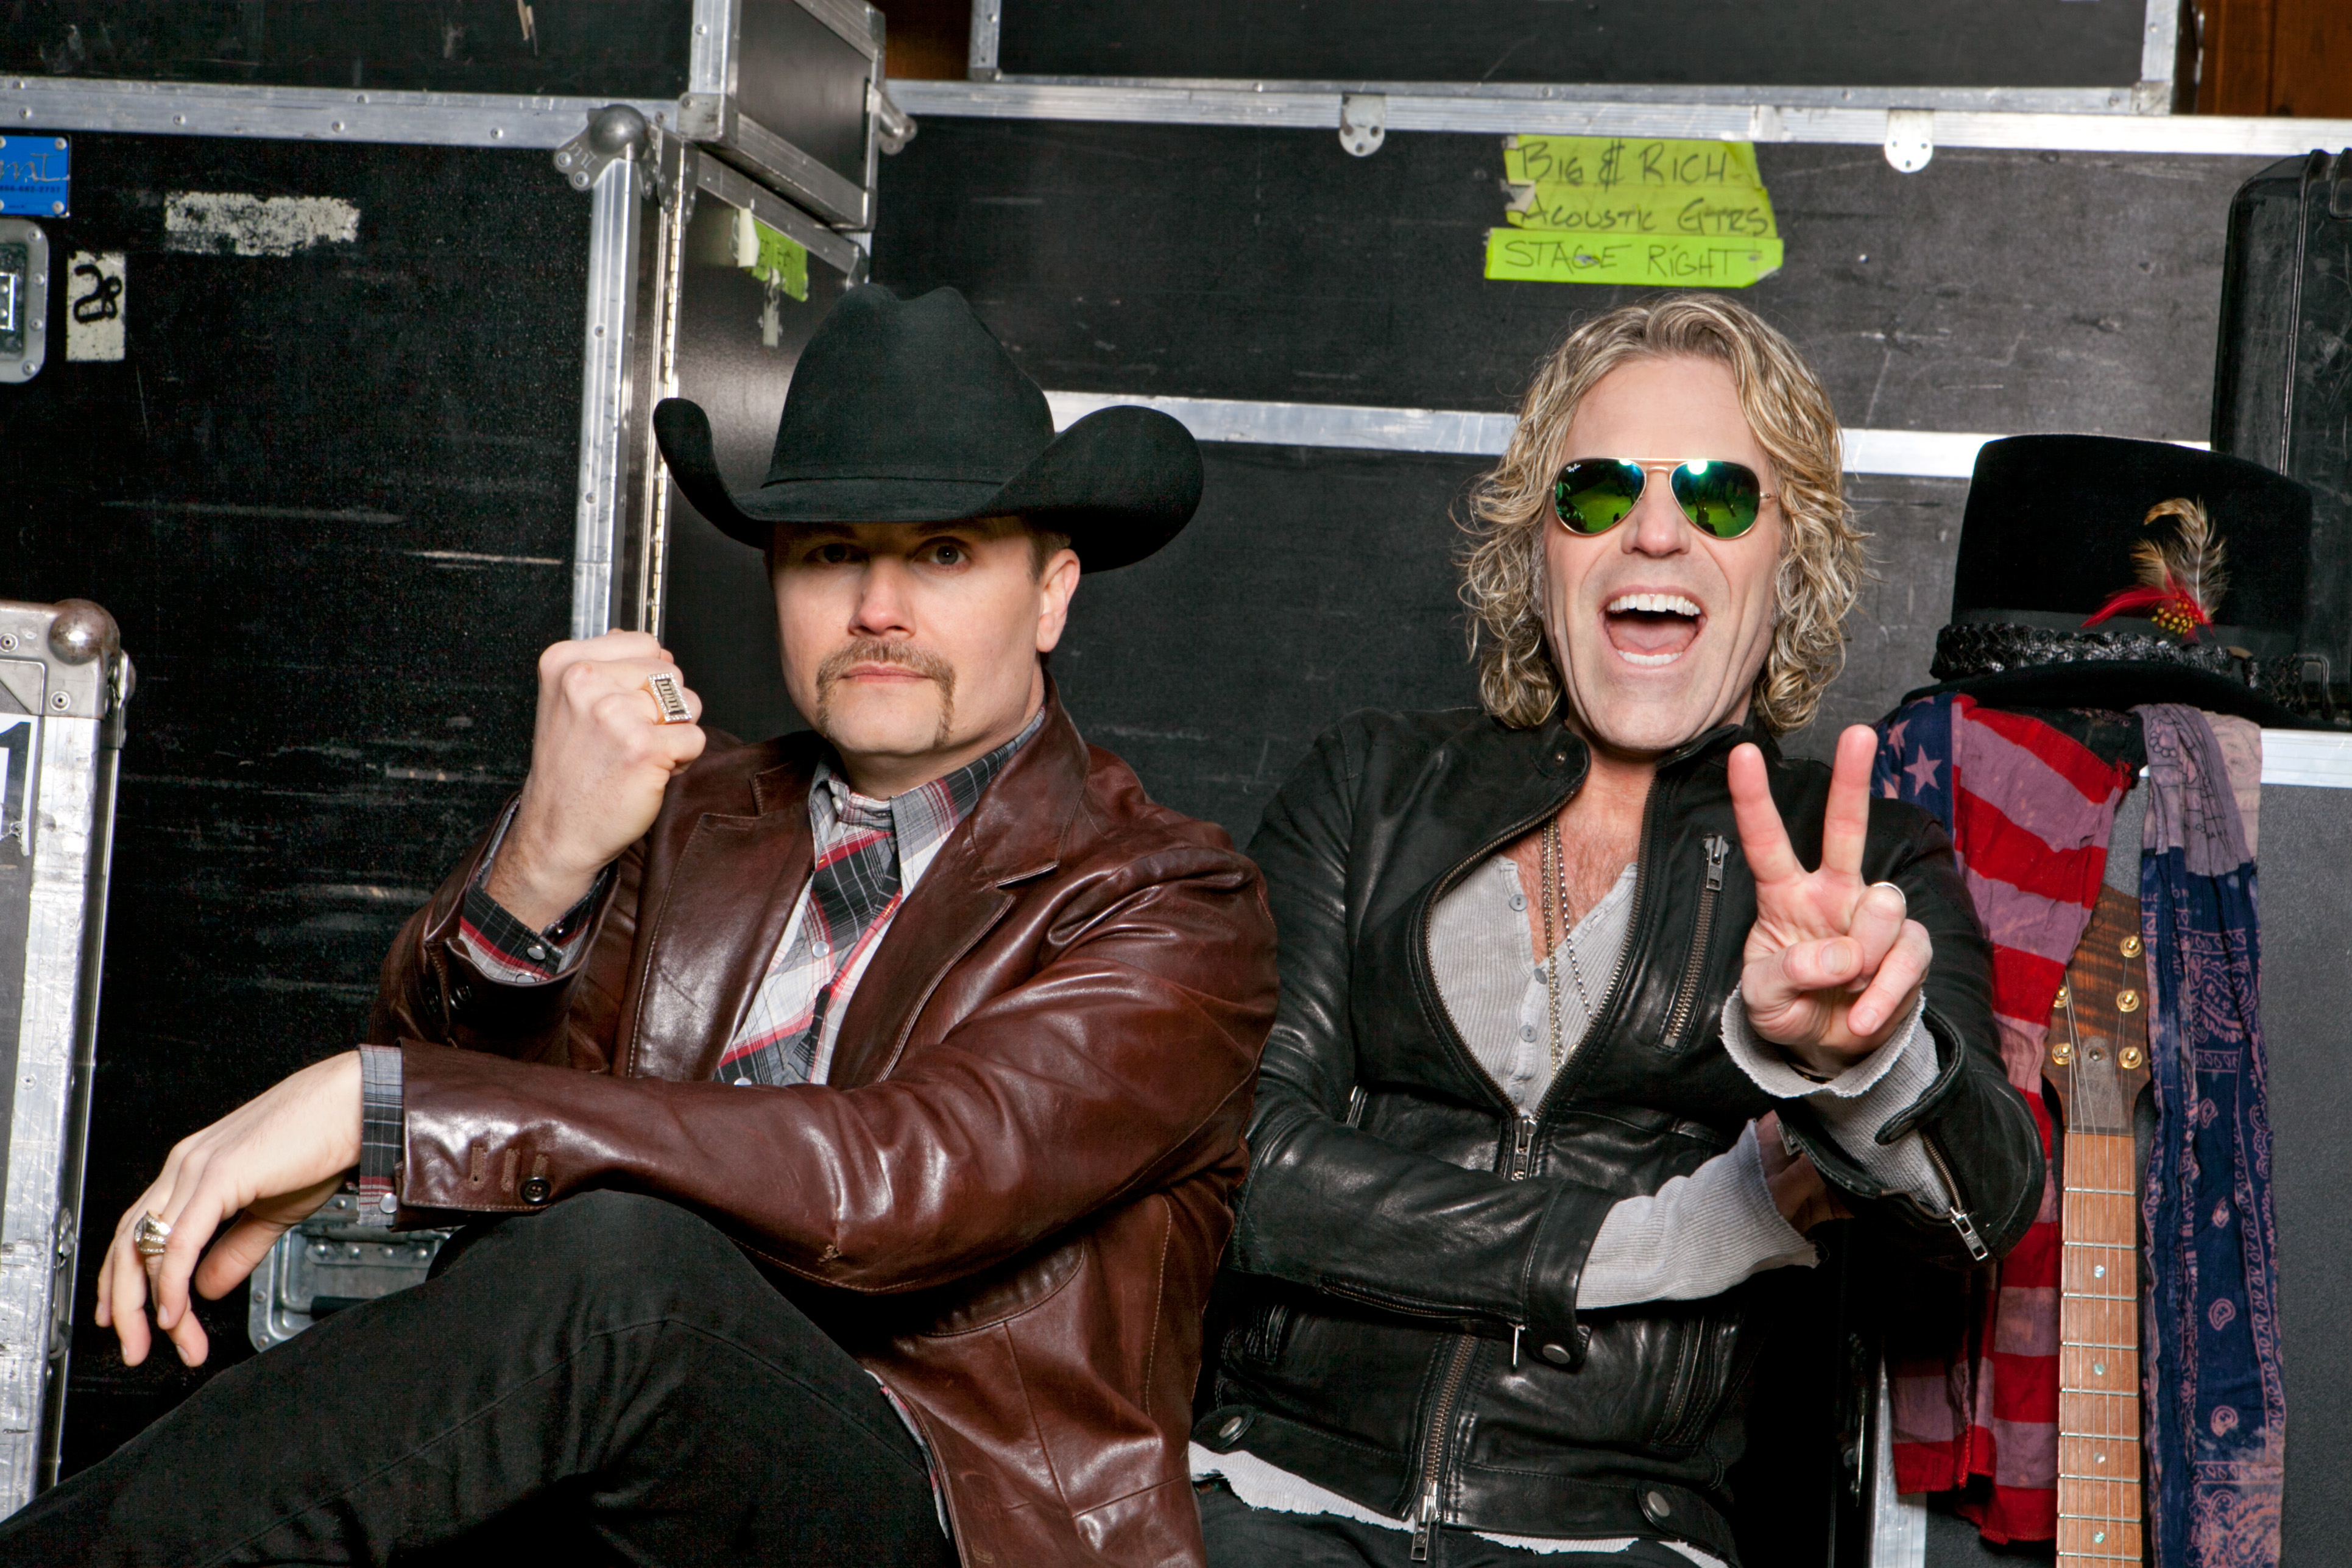 Big & Rich React To Nomination For ‘Vocal Duo of the Year’ At The 52nd Academy of Country Music Awards